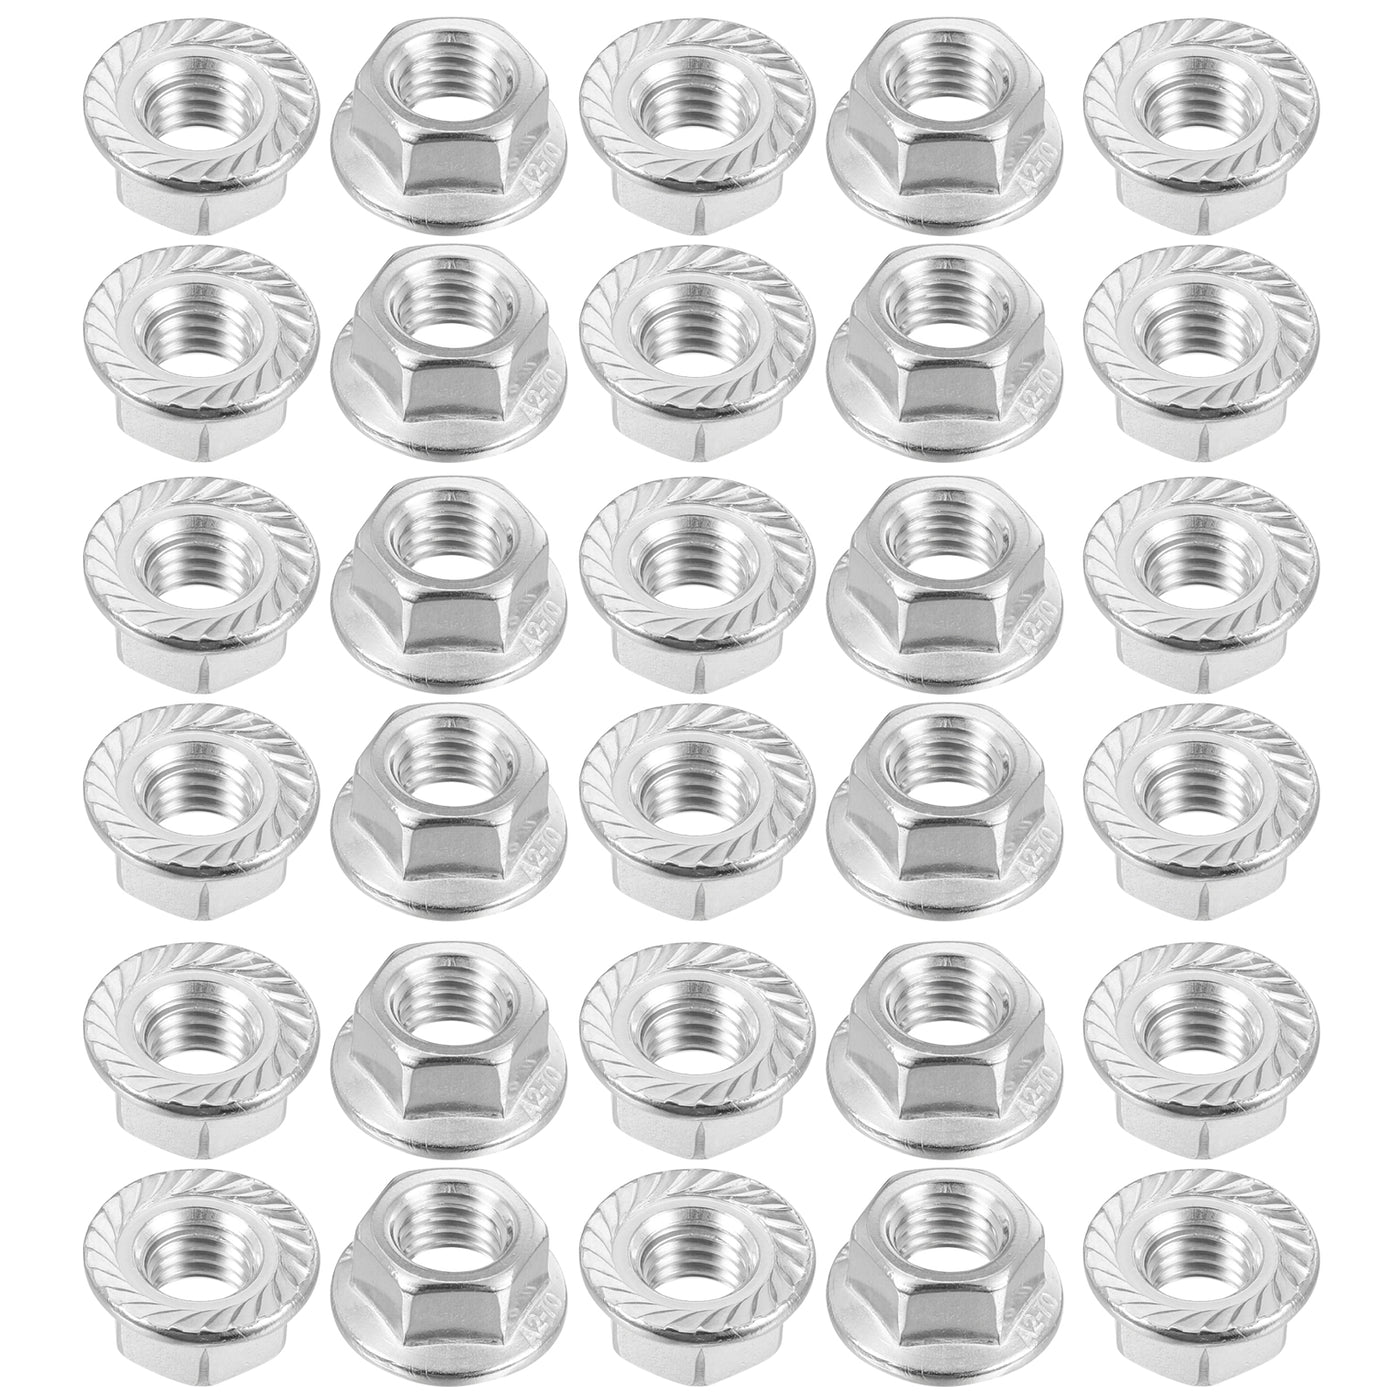 uxcell Uxcell M10x1.5mm Serrated Flange Hex Lock Nuts, 30Pcs Hexagon Flange Nut, Silver